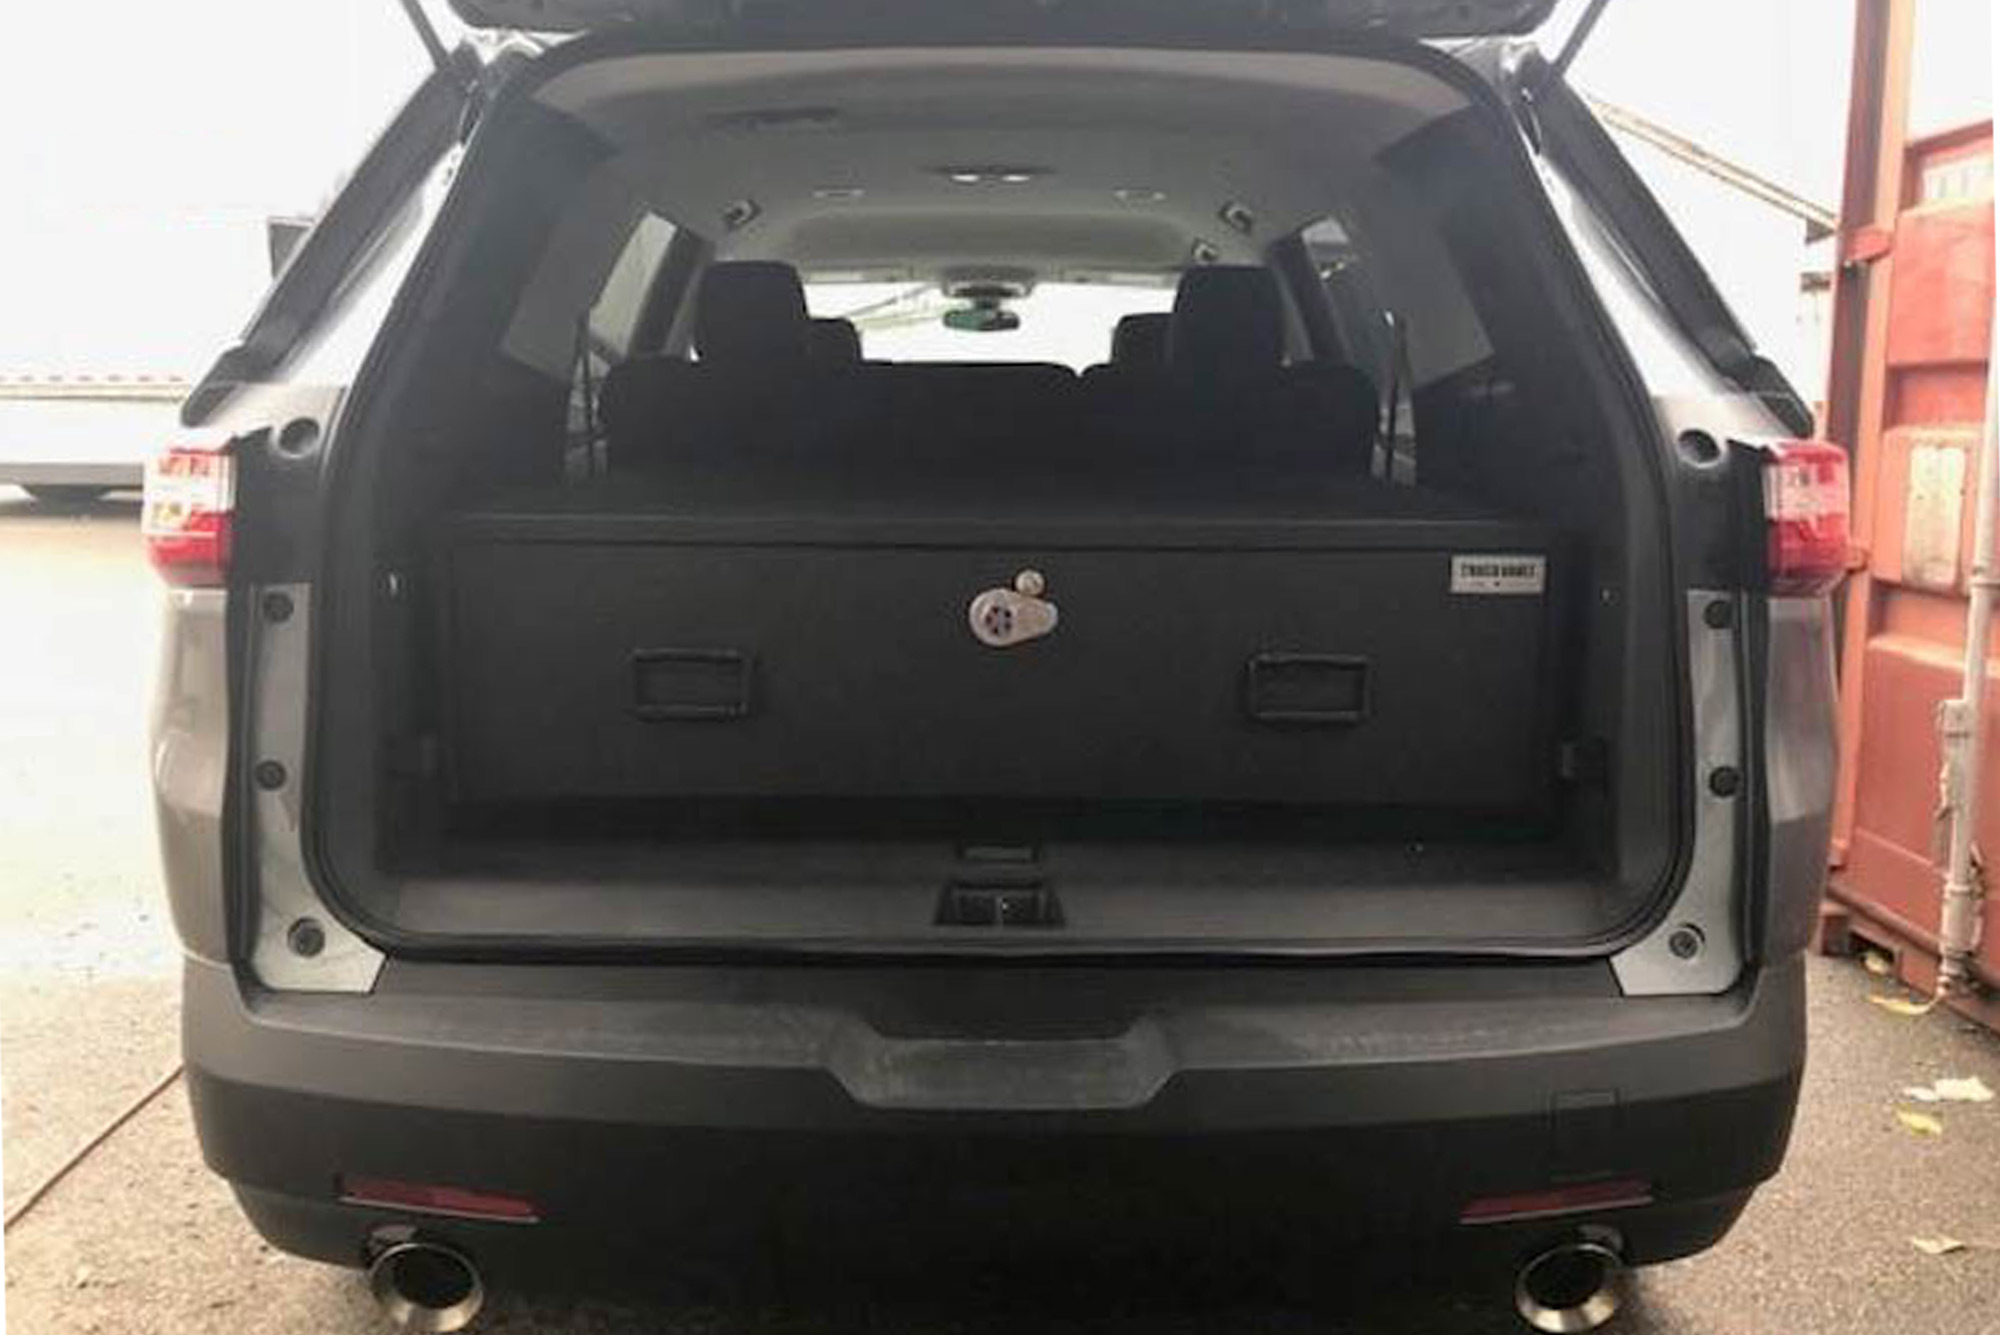 A gray Chevy Traverse with a TruckVault in the cargo space.